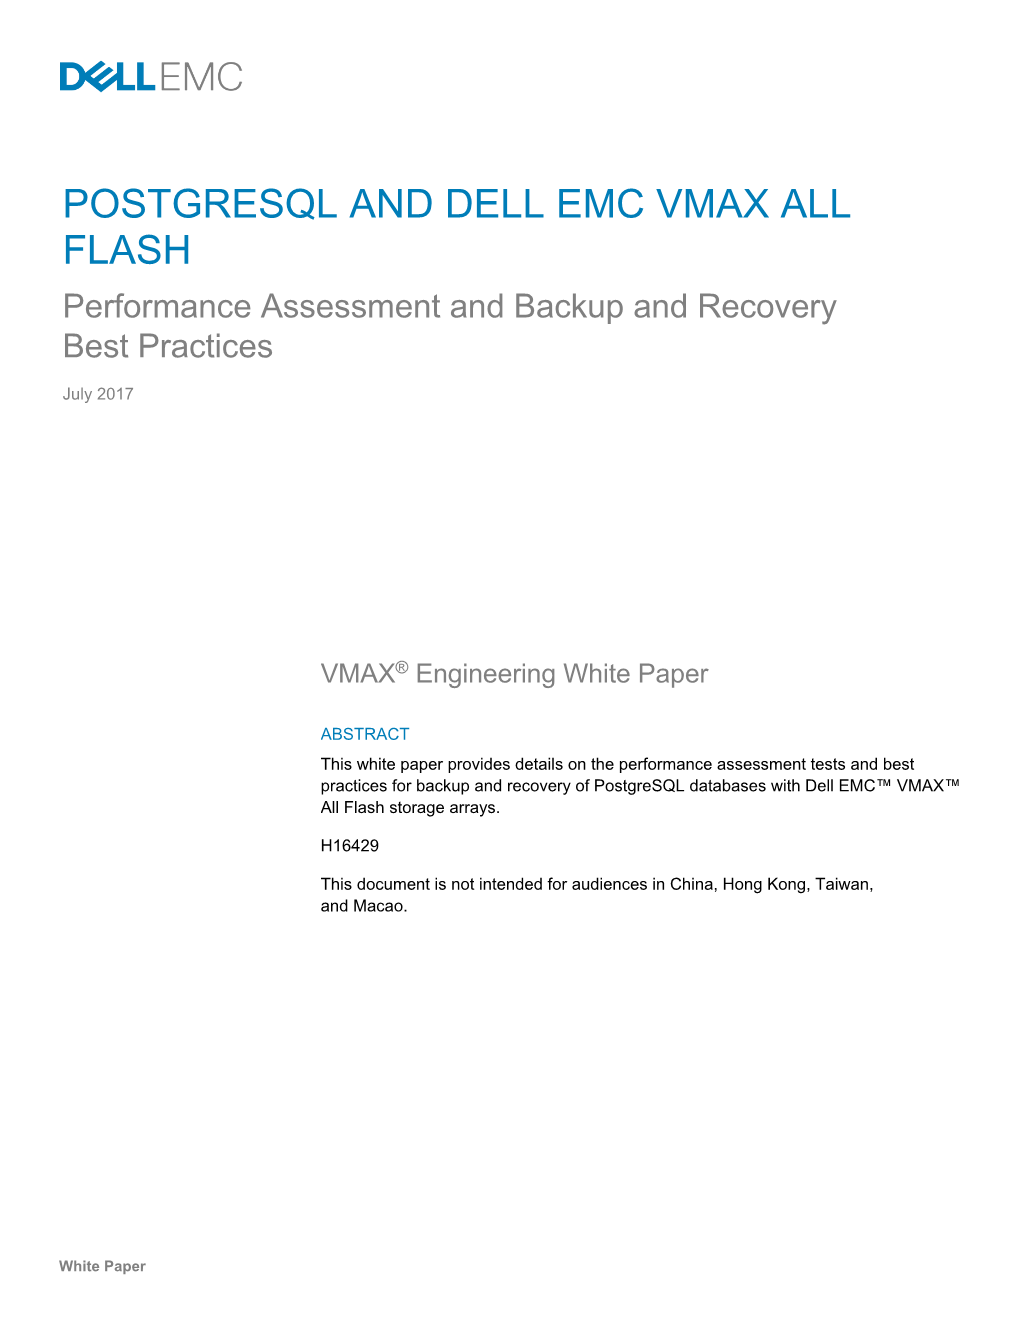 POSTGRESQL and DELL EMC VMAX ALL FLASH Performance Assessment and Backup and Recovery Best Practices